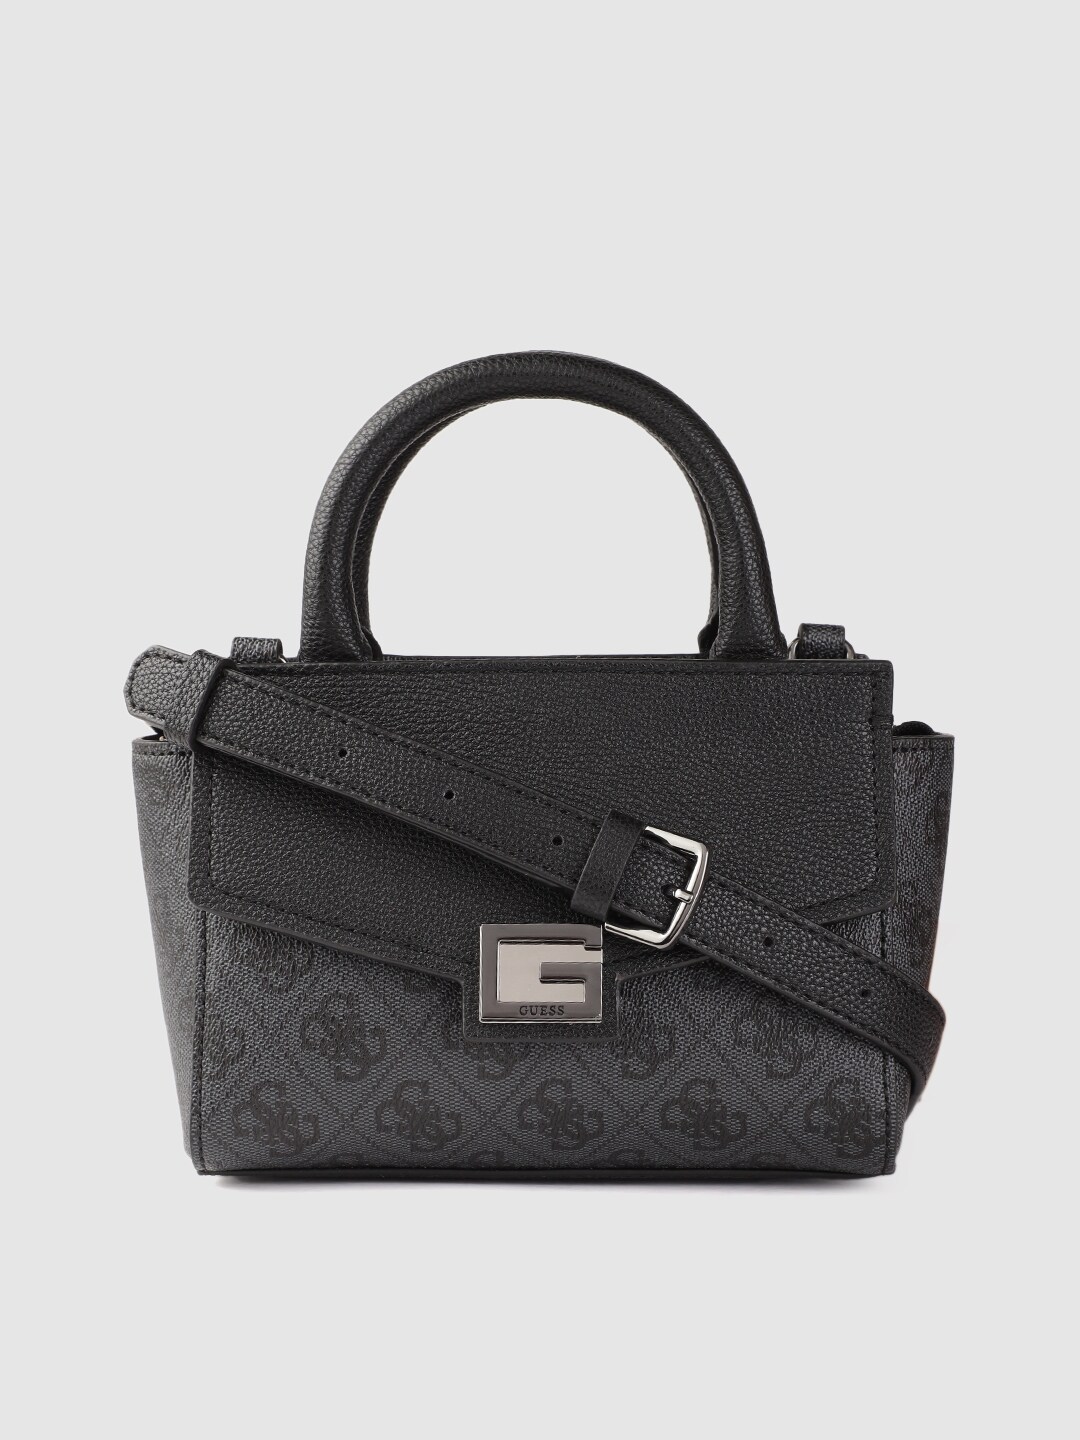 GUESS Women Charcoal Grey Brand Logo Print Structured Handheld Bag Price in India